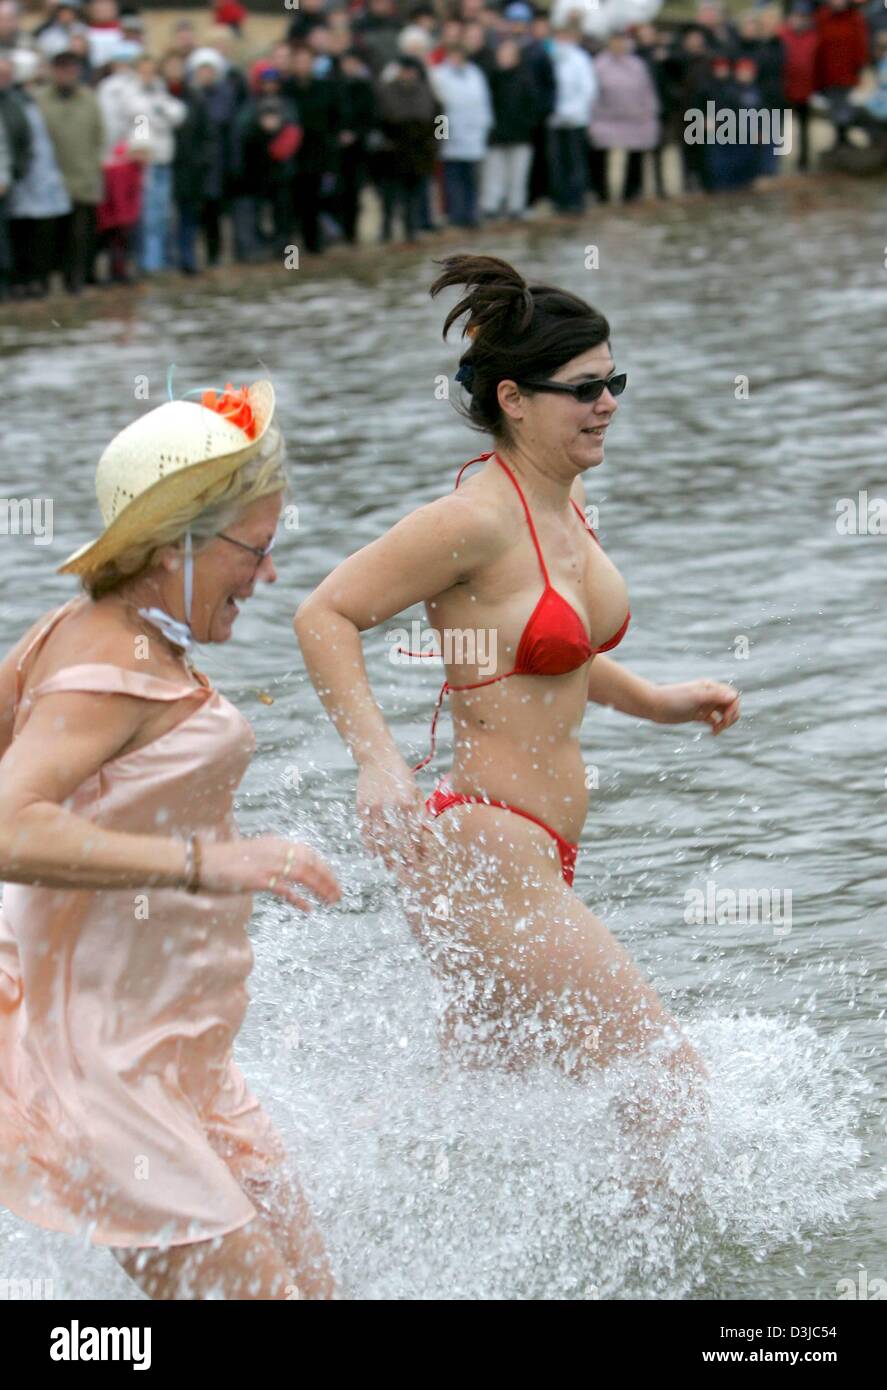 (dpa) - Women clad with costumes and bikinis from Rostock, Germany, run into the Oranke lake in Berlin, Germany, 8 January 2005. The 'Berliner Seehunde' (Berlin seals) club invited clubs from allover Germany to Germany's capital for the traditional winter swimming. Stock Photo